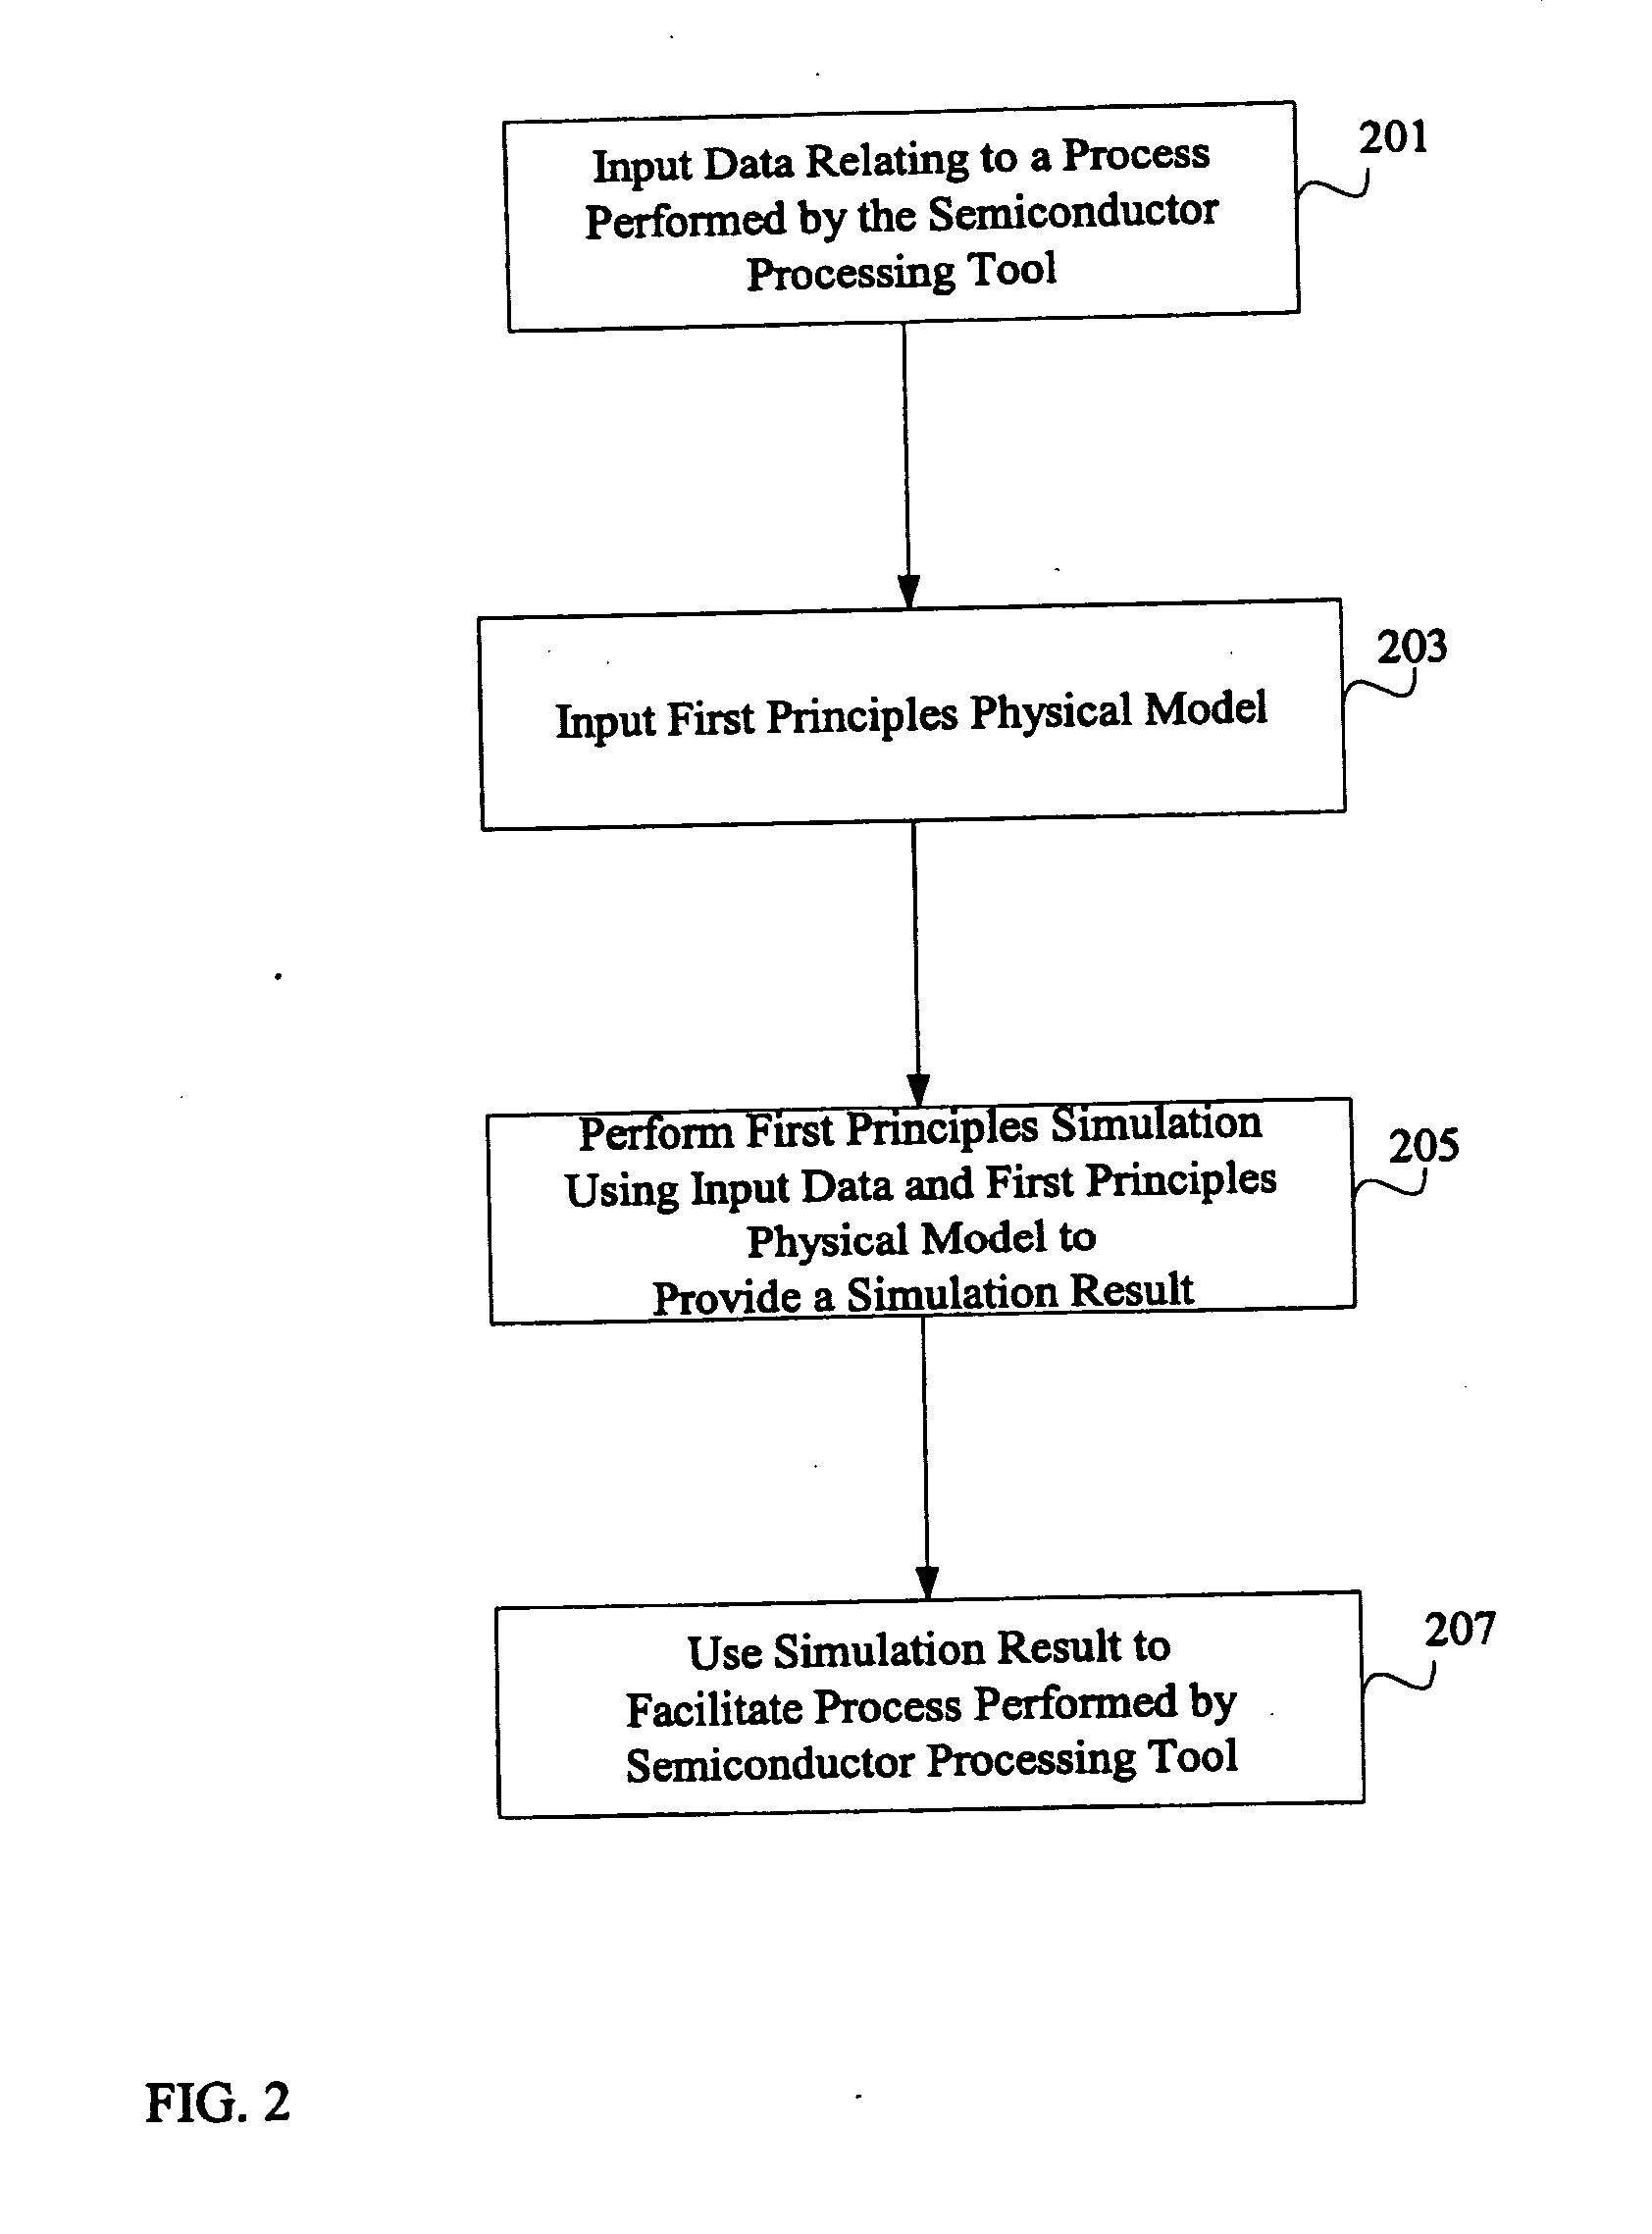 System and method for using first-principles simulation to provide virtual sensors that facilitate a semiconductor manufacturing process